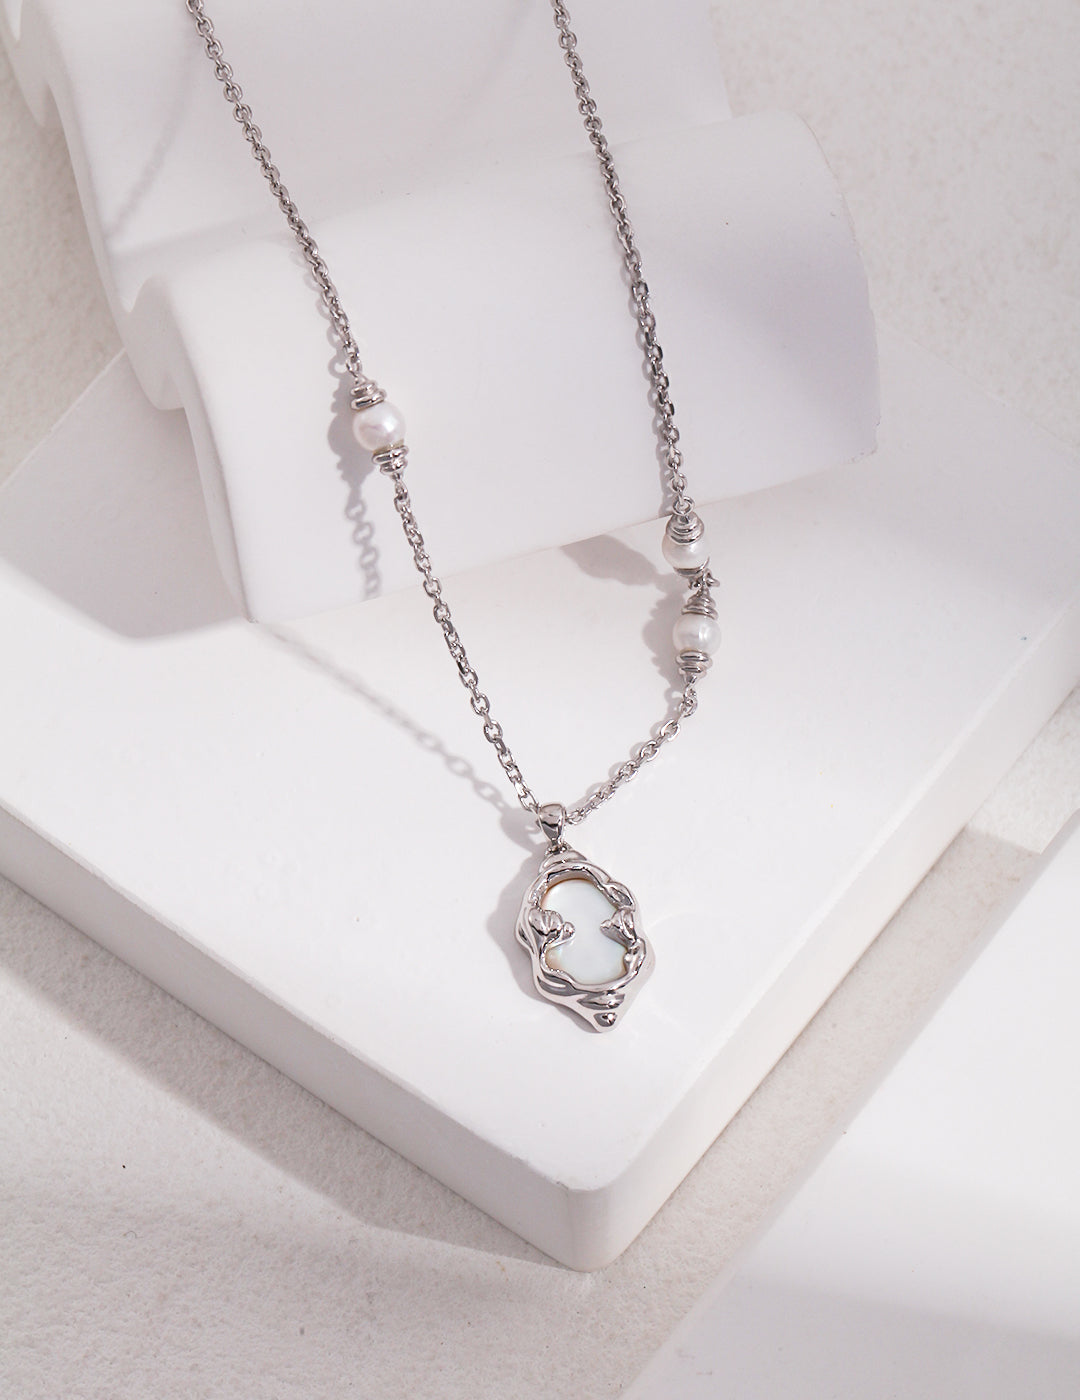 Mirror-like Moonstone Pendant with Floating Pearl Necklace